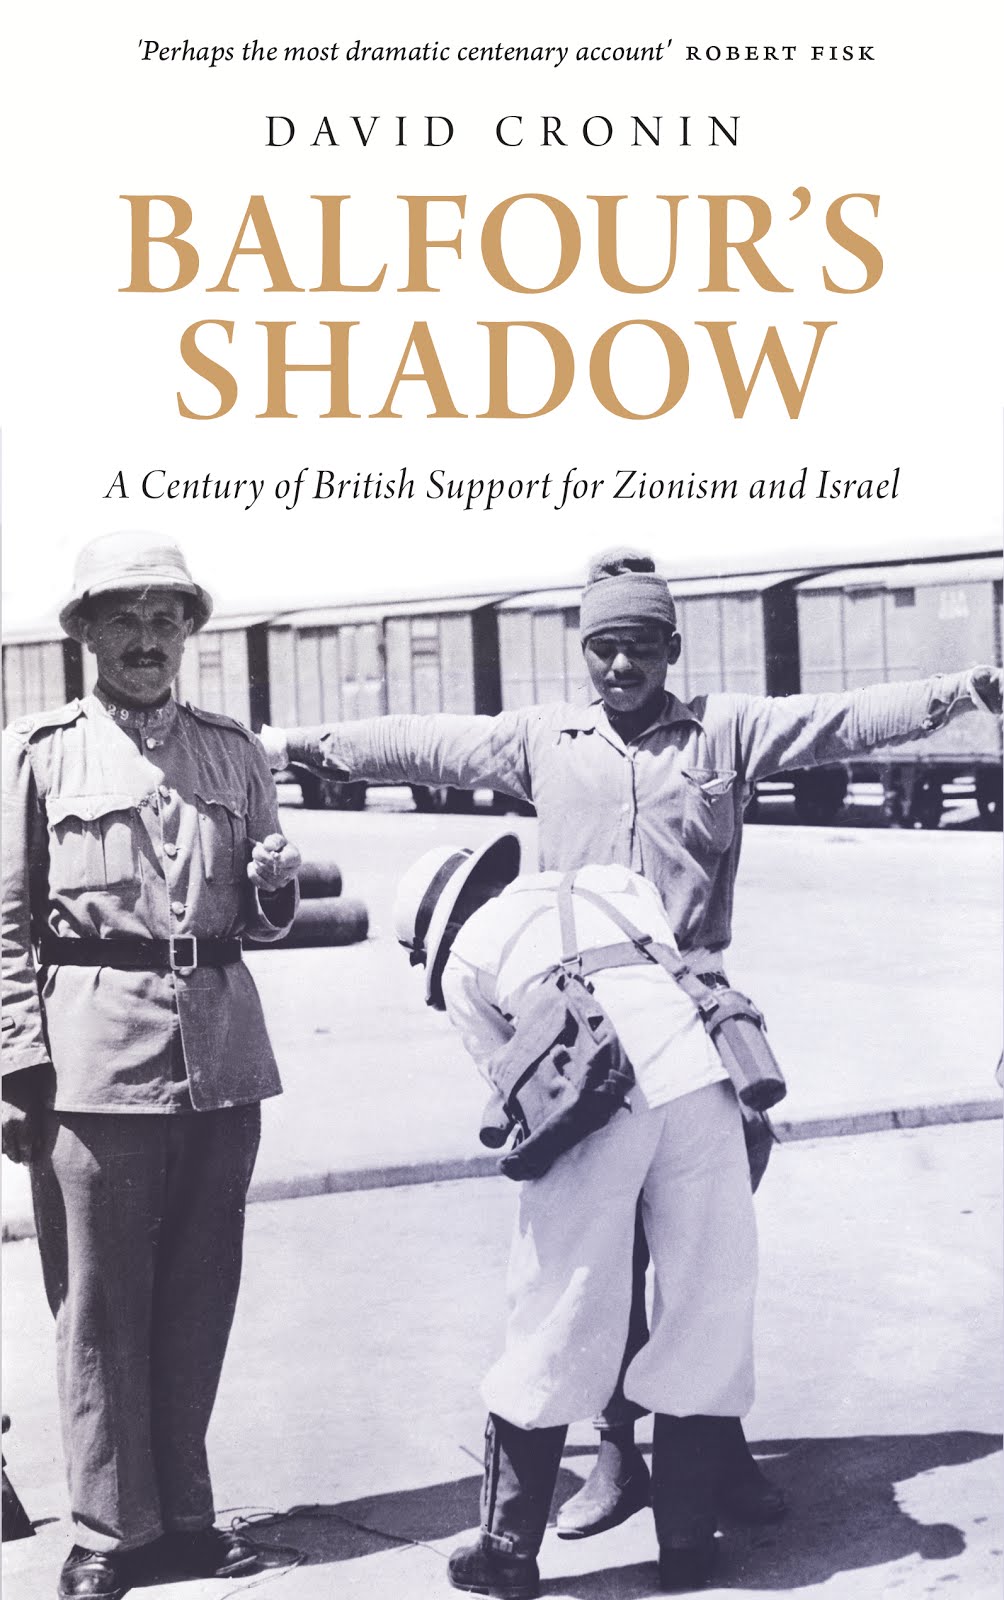 My new book 'Balfour's Shadow'